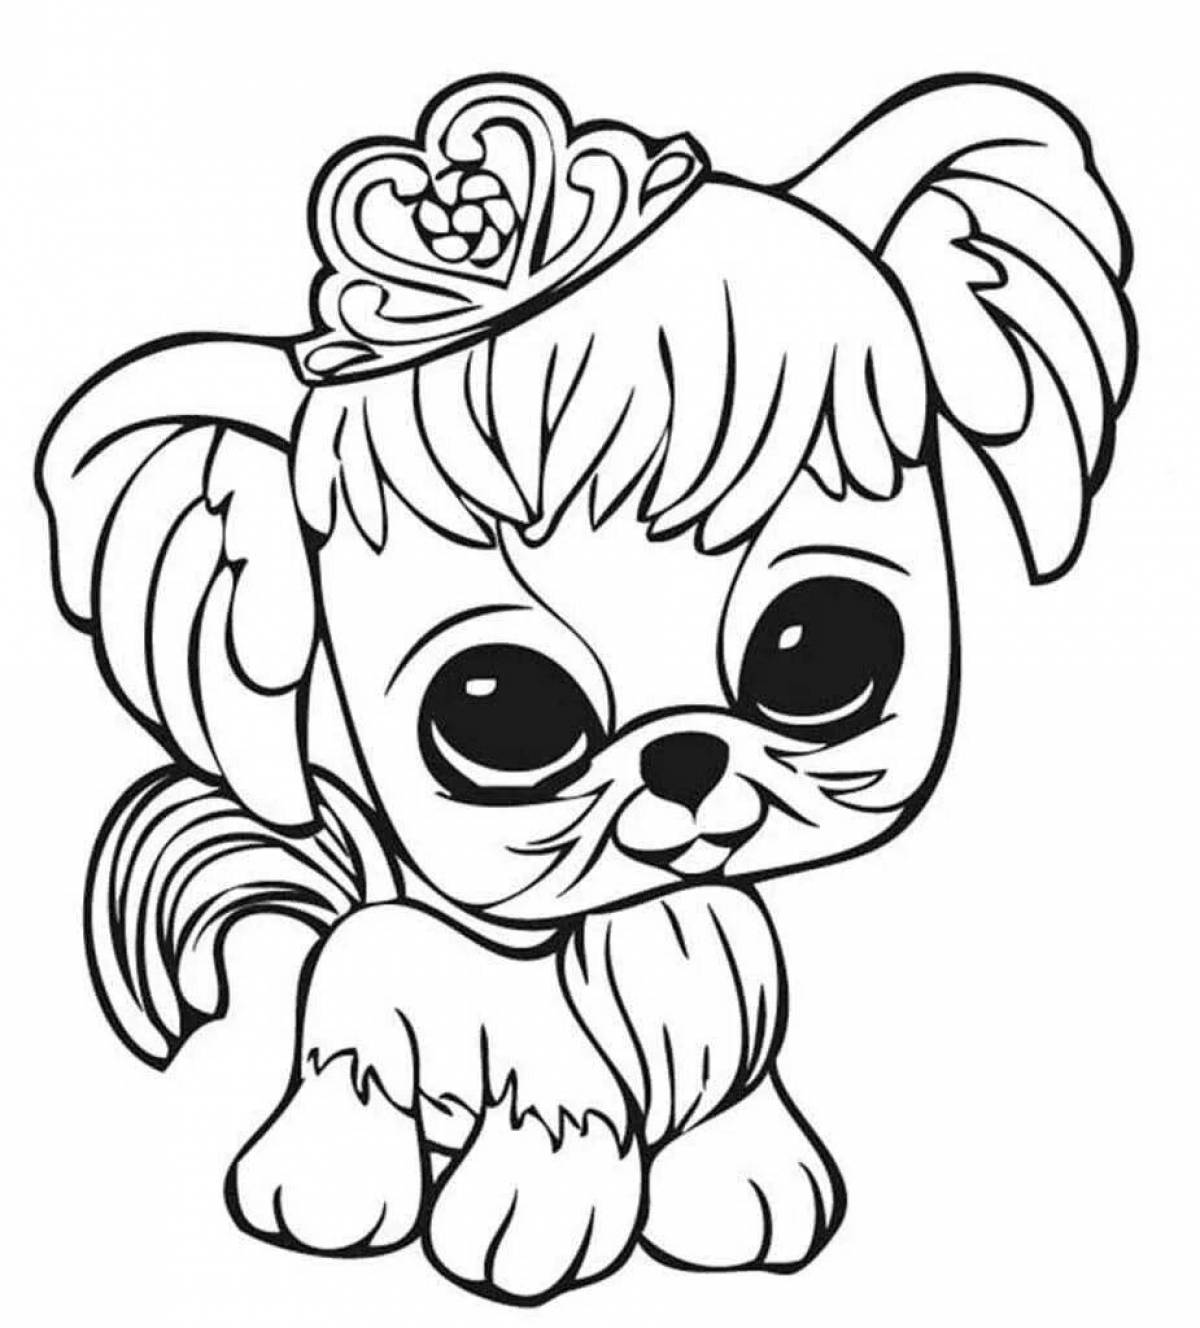 Caring cute dog coloring page for girls